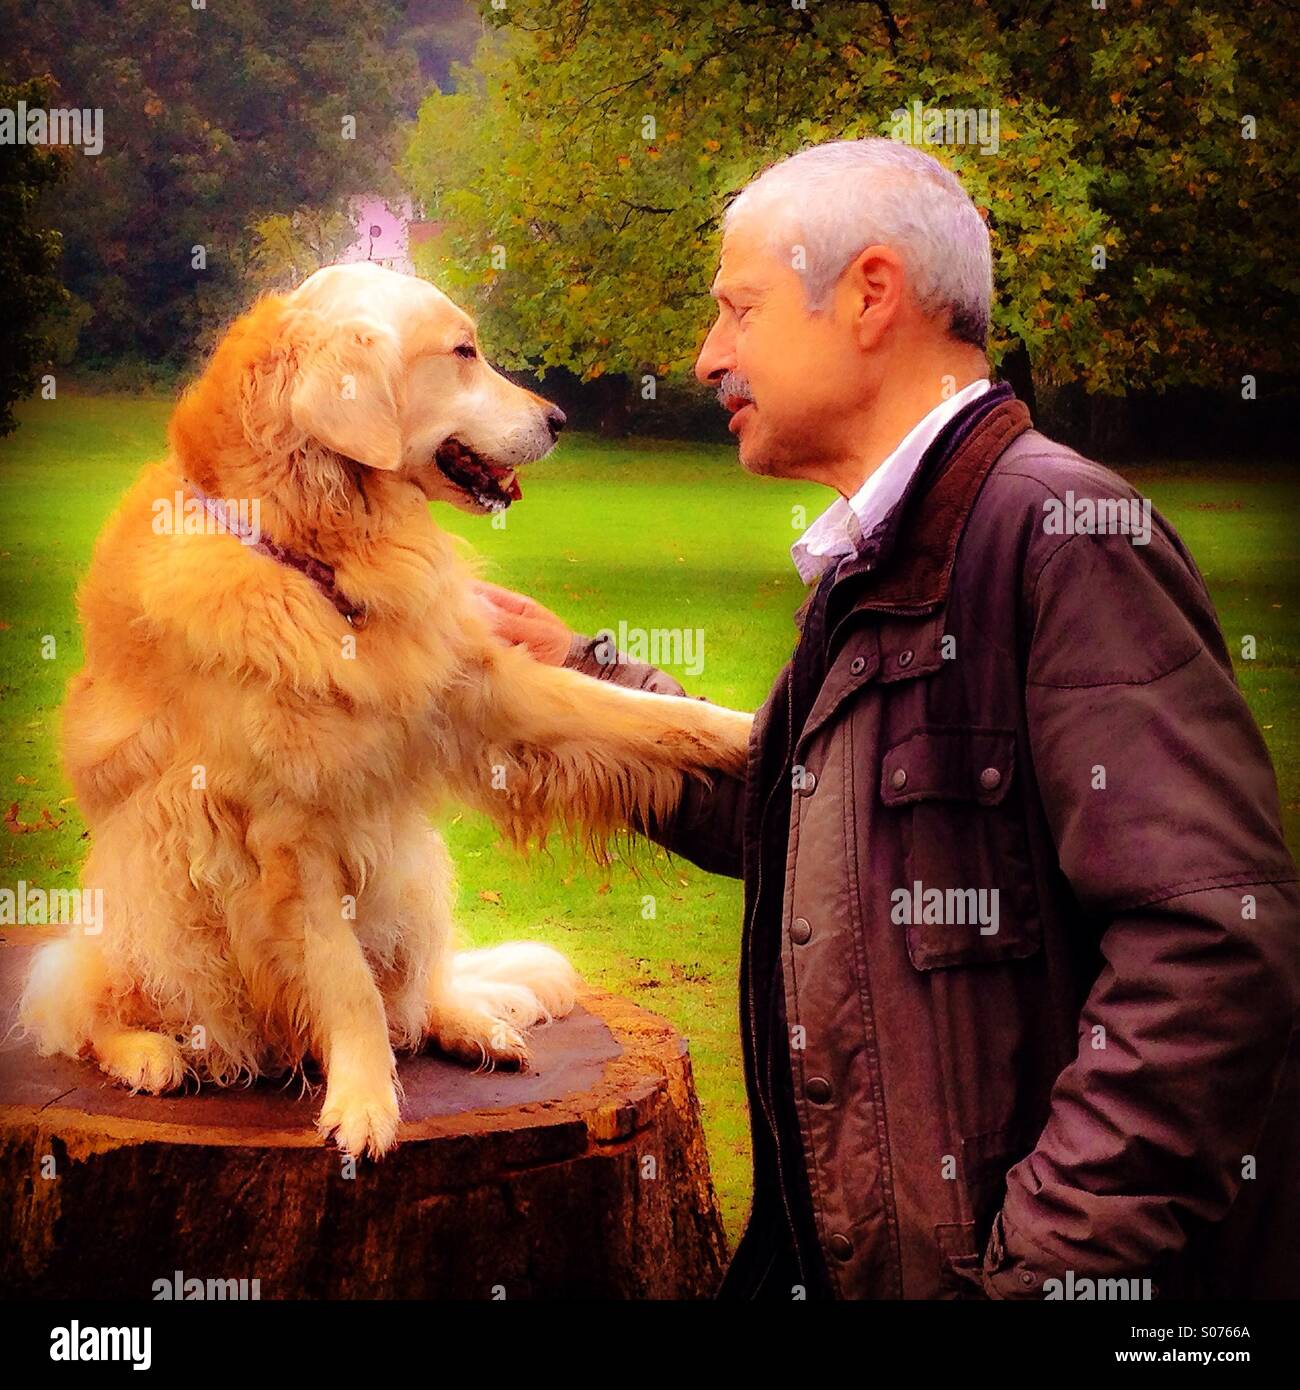 Dog sitting on tree stump with owner holding its paw Stock Photo